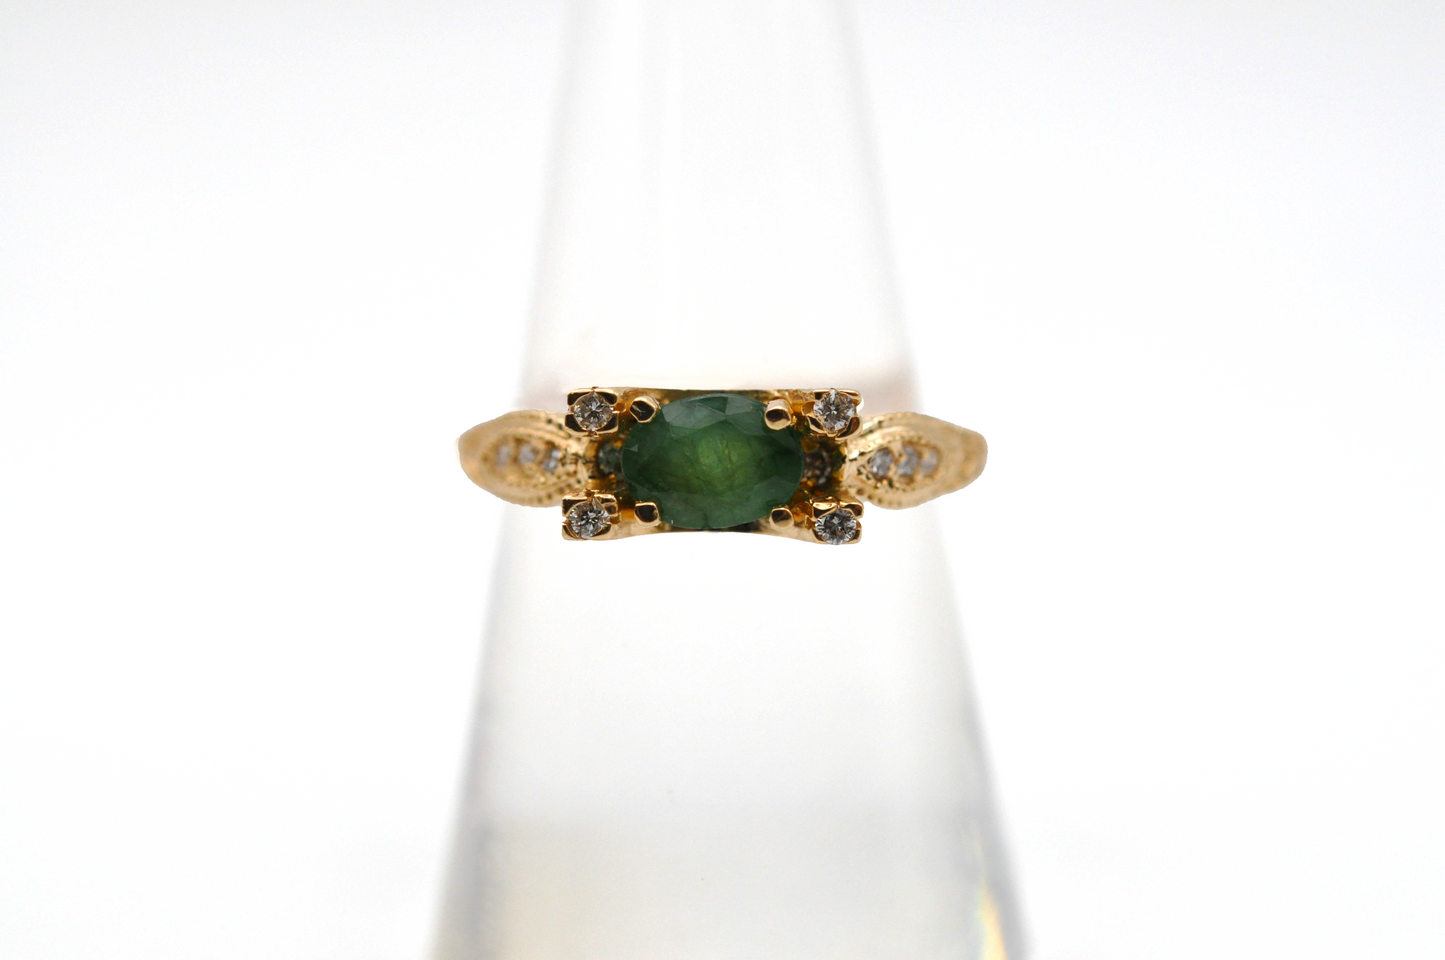 Unique Yellow Gold Vintage Oval Emerald Ring with Diamond Accents